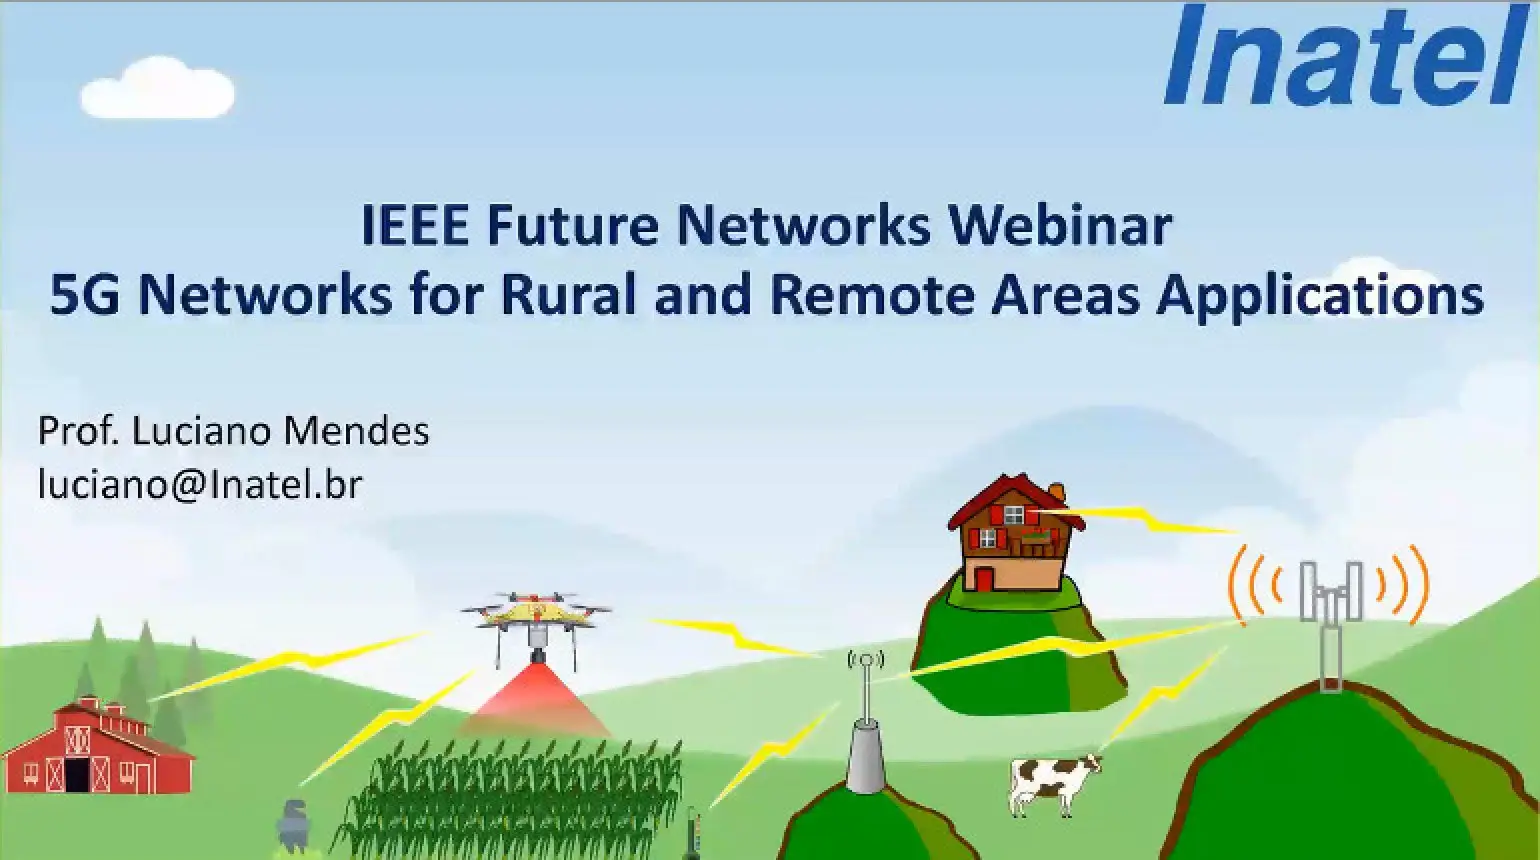 5G Networks for Rural and Remote Areas Applications